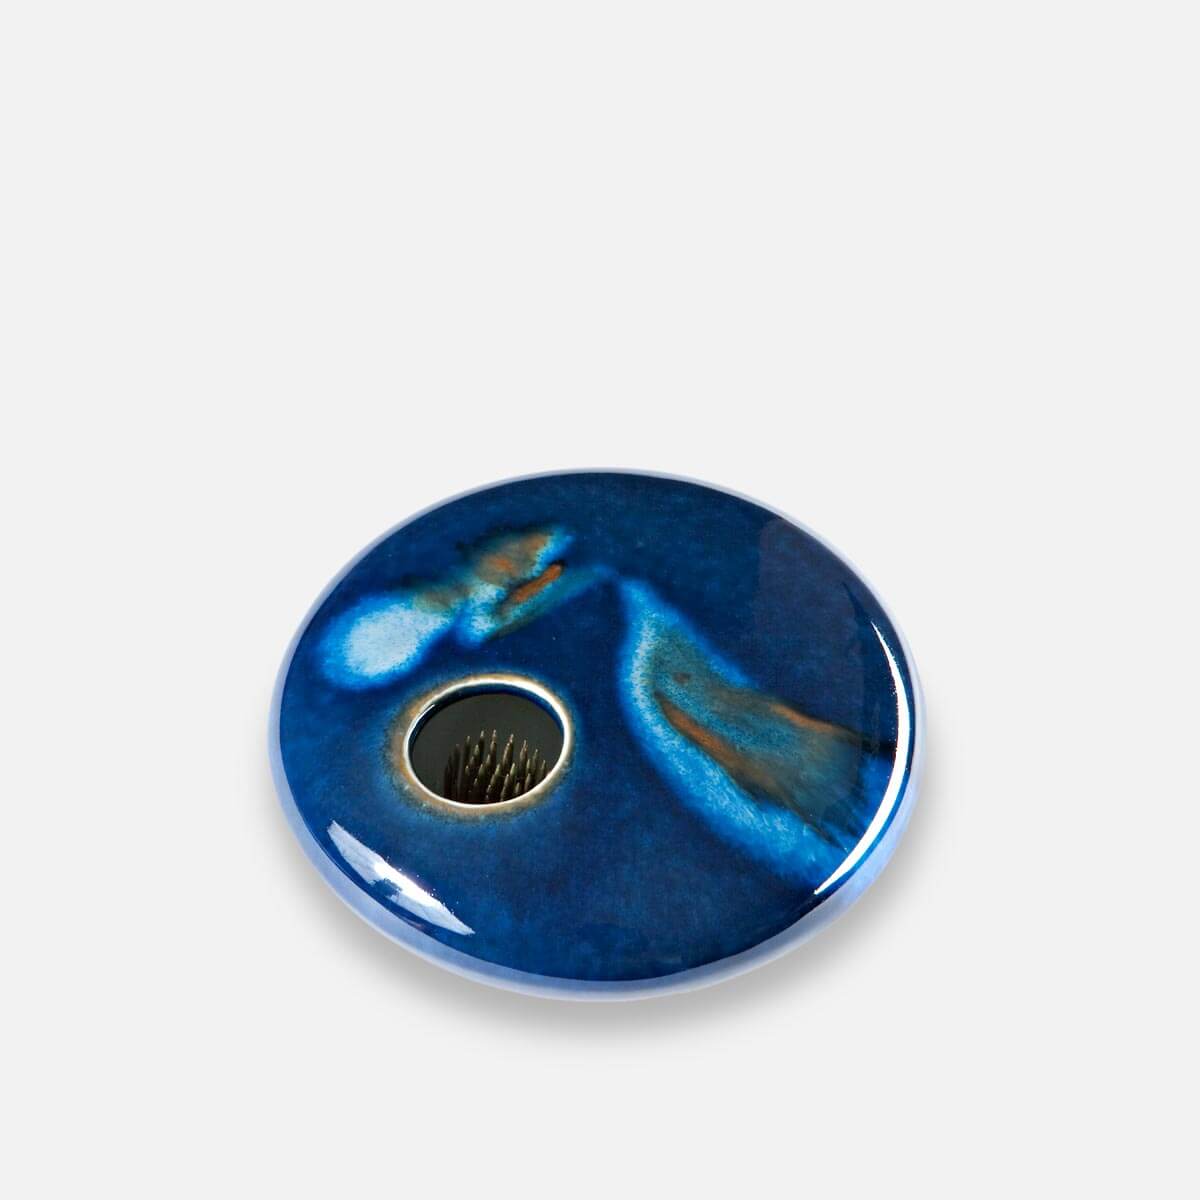 Small Round Ikebana Flower Vase with Pin Frog in Blue Wave